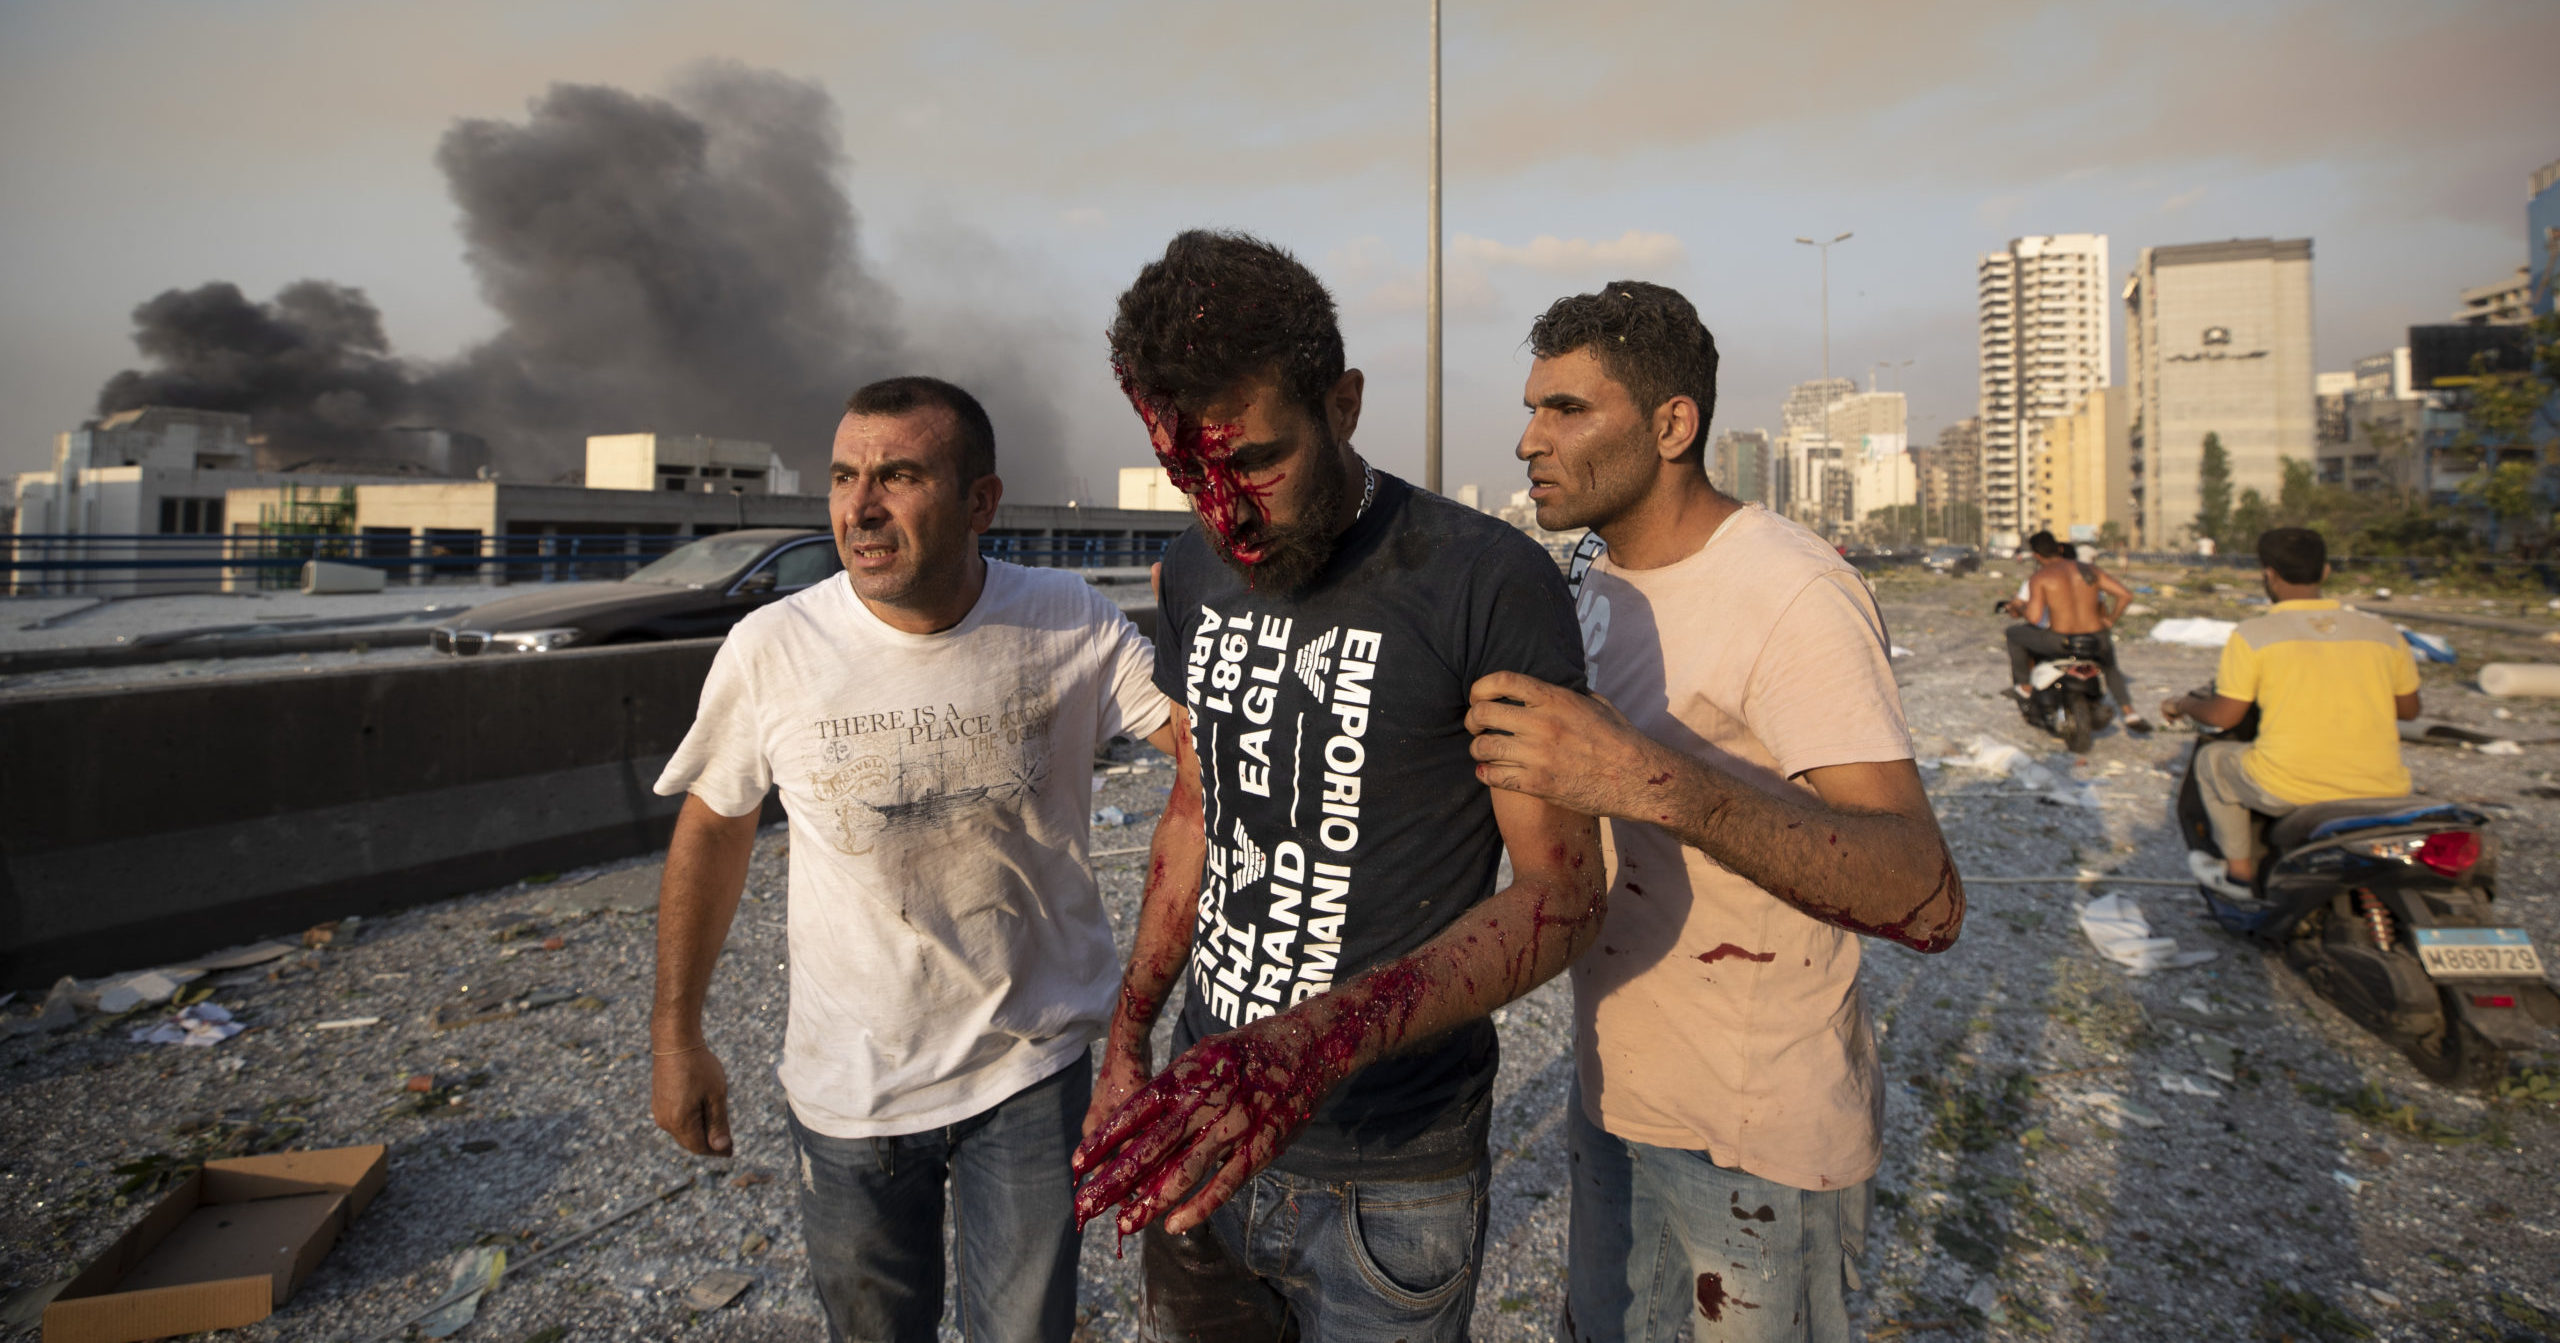 People help a man wounded in a massive explosion in Beirut, Lebanon, on Aug. 4, 2020.